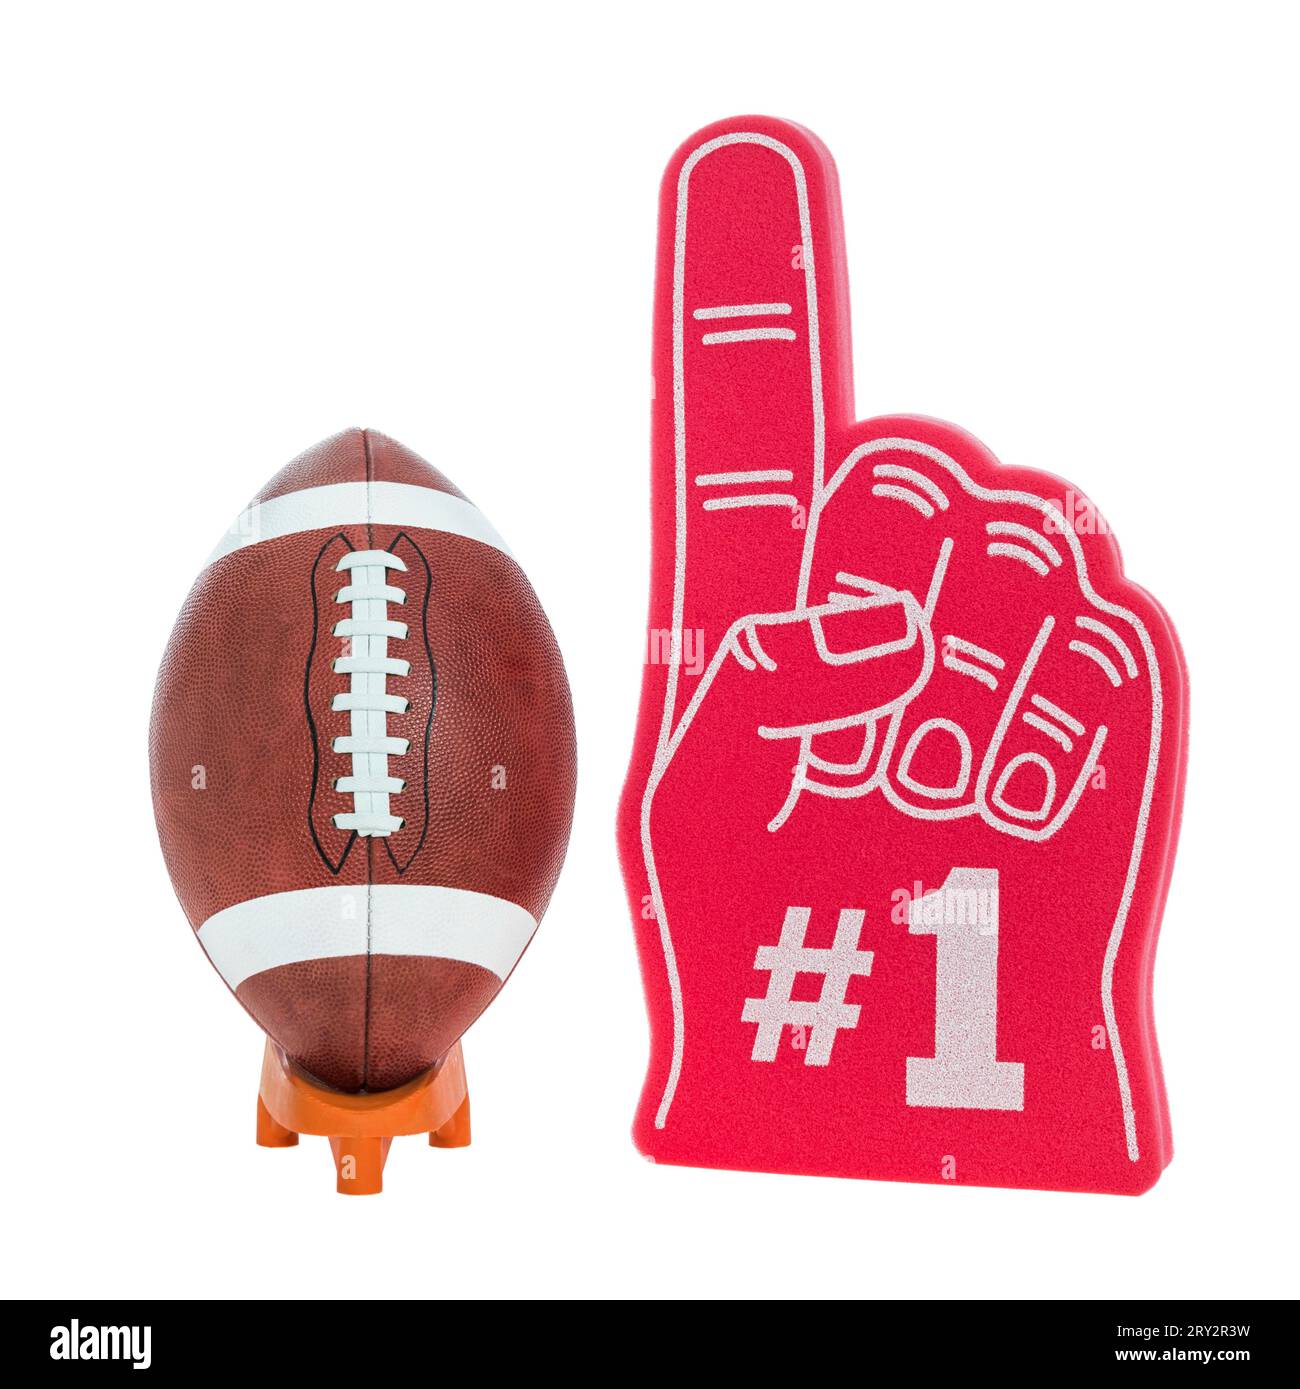 Foam Fingers Icons In Six Colors We39re 1 Lets39 Go Number One Fan Stock  Illustration - Download Image Now - iStock